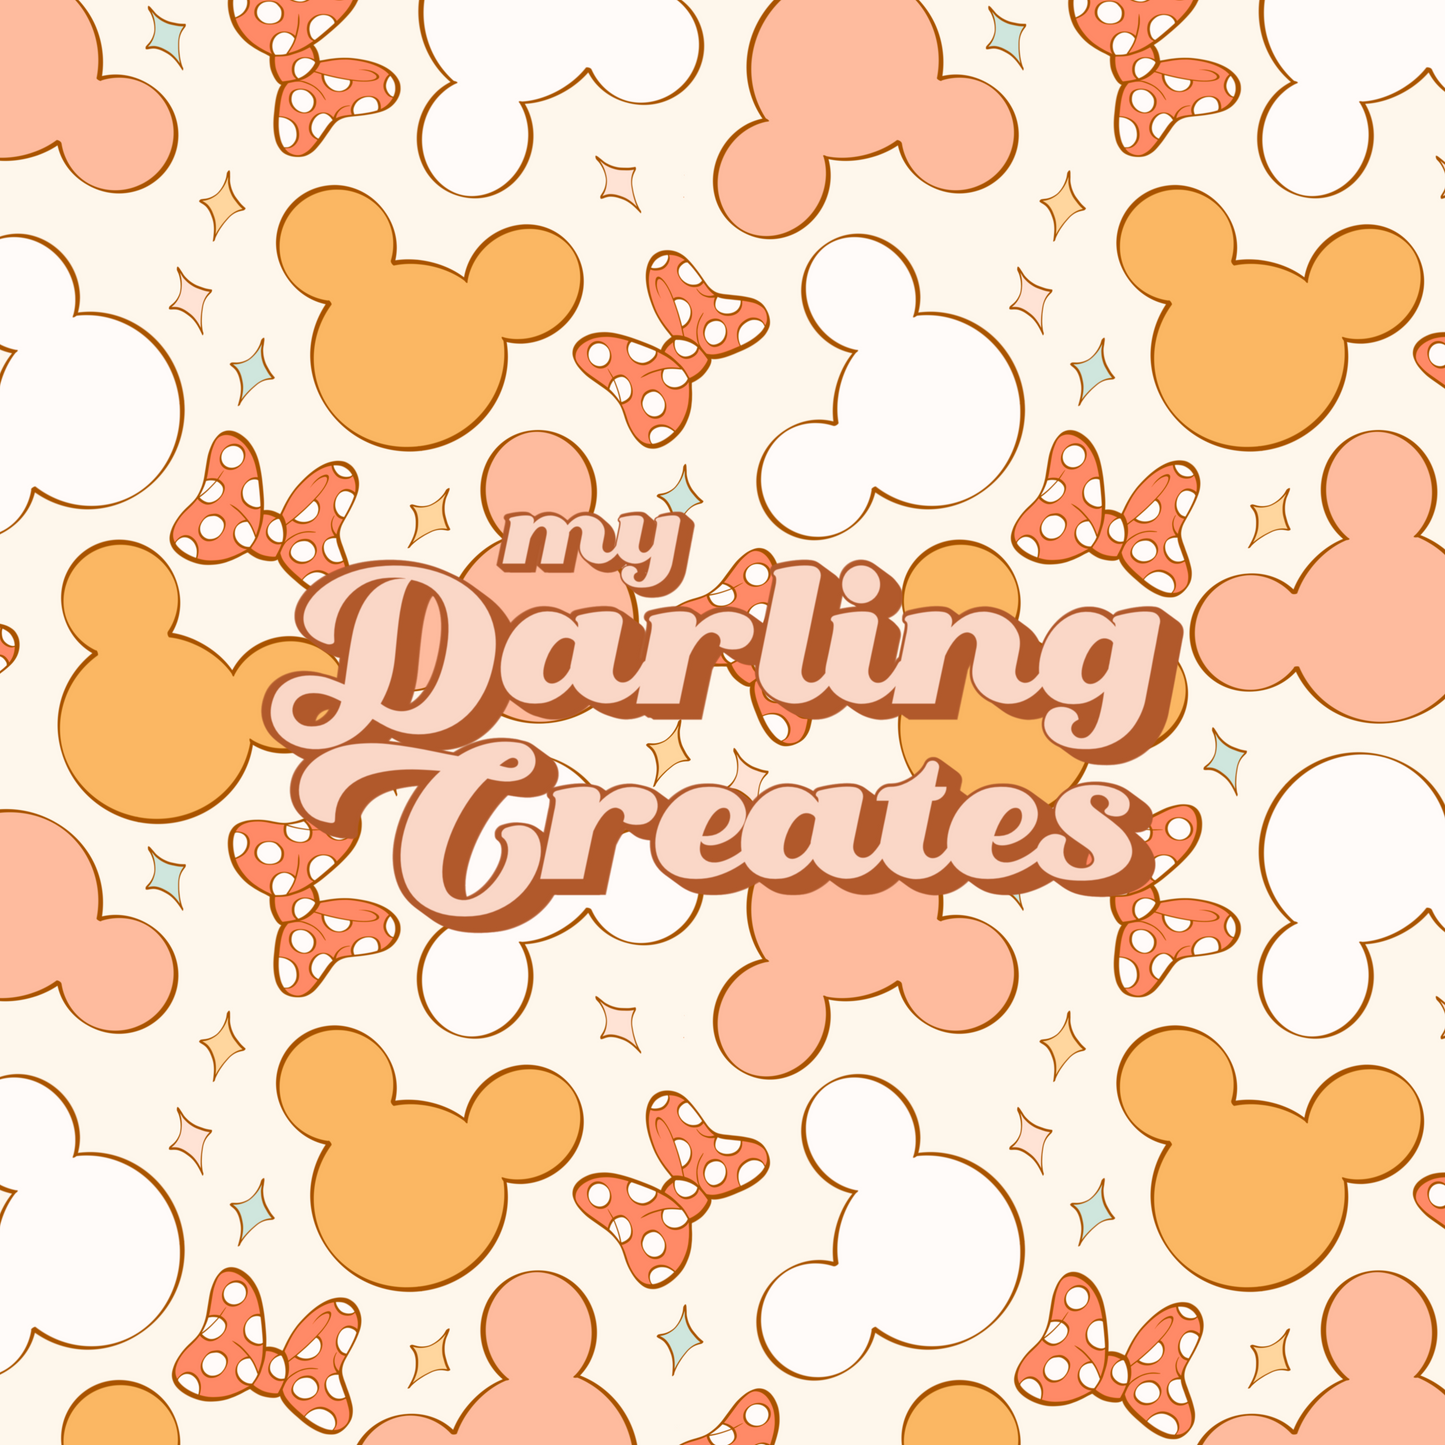 Magical Ears & Bows - Seamless Pattern